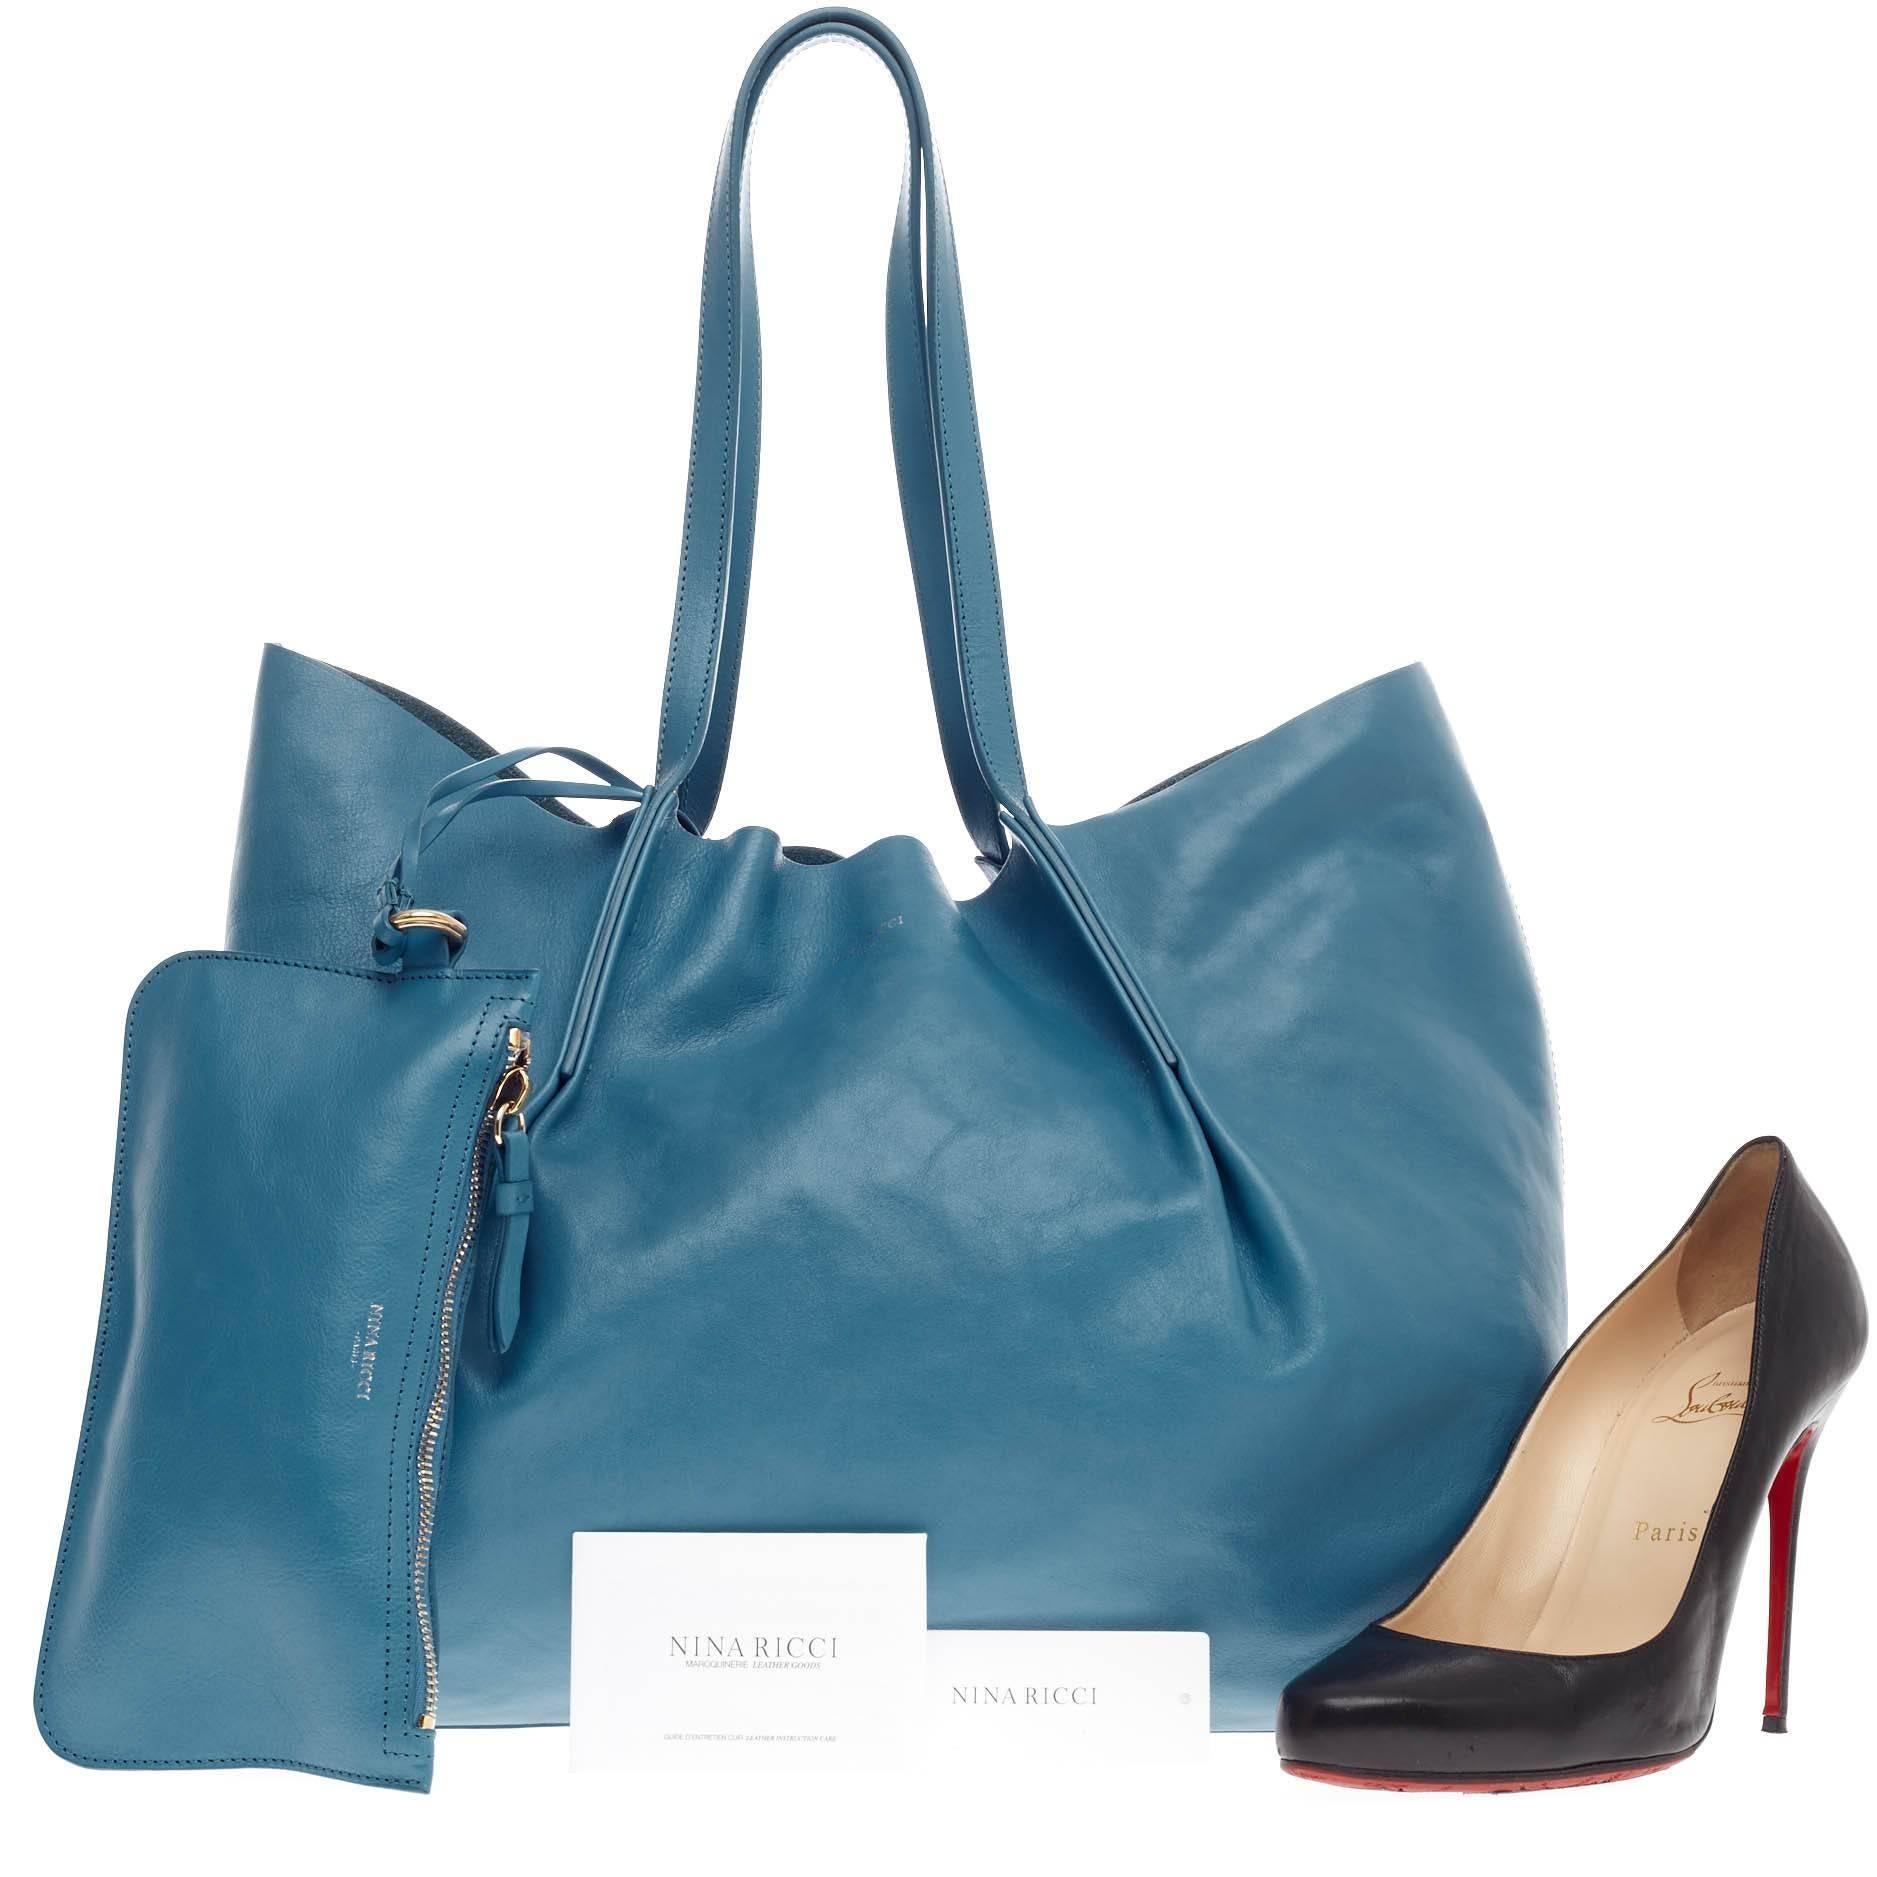 This authentic Nina Ricci Ondine Tote Leather is an easy-to-go shopper tote made for everyday excursions. Crafted in soft aqua marine leather, this lightweight tote features dual-top slim handles, top stitched cinched pleating, and gold stamped Nina